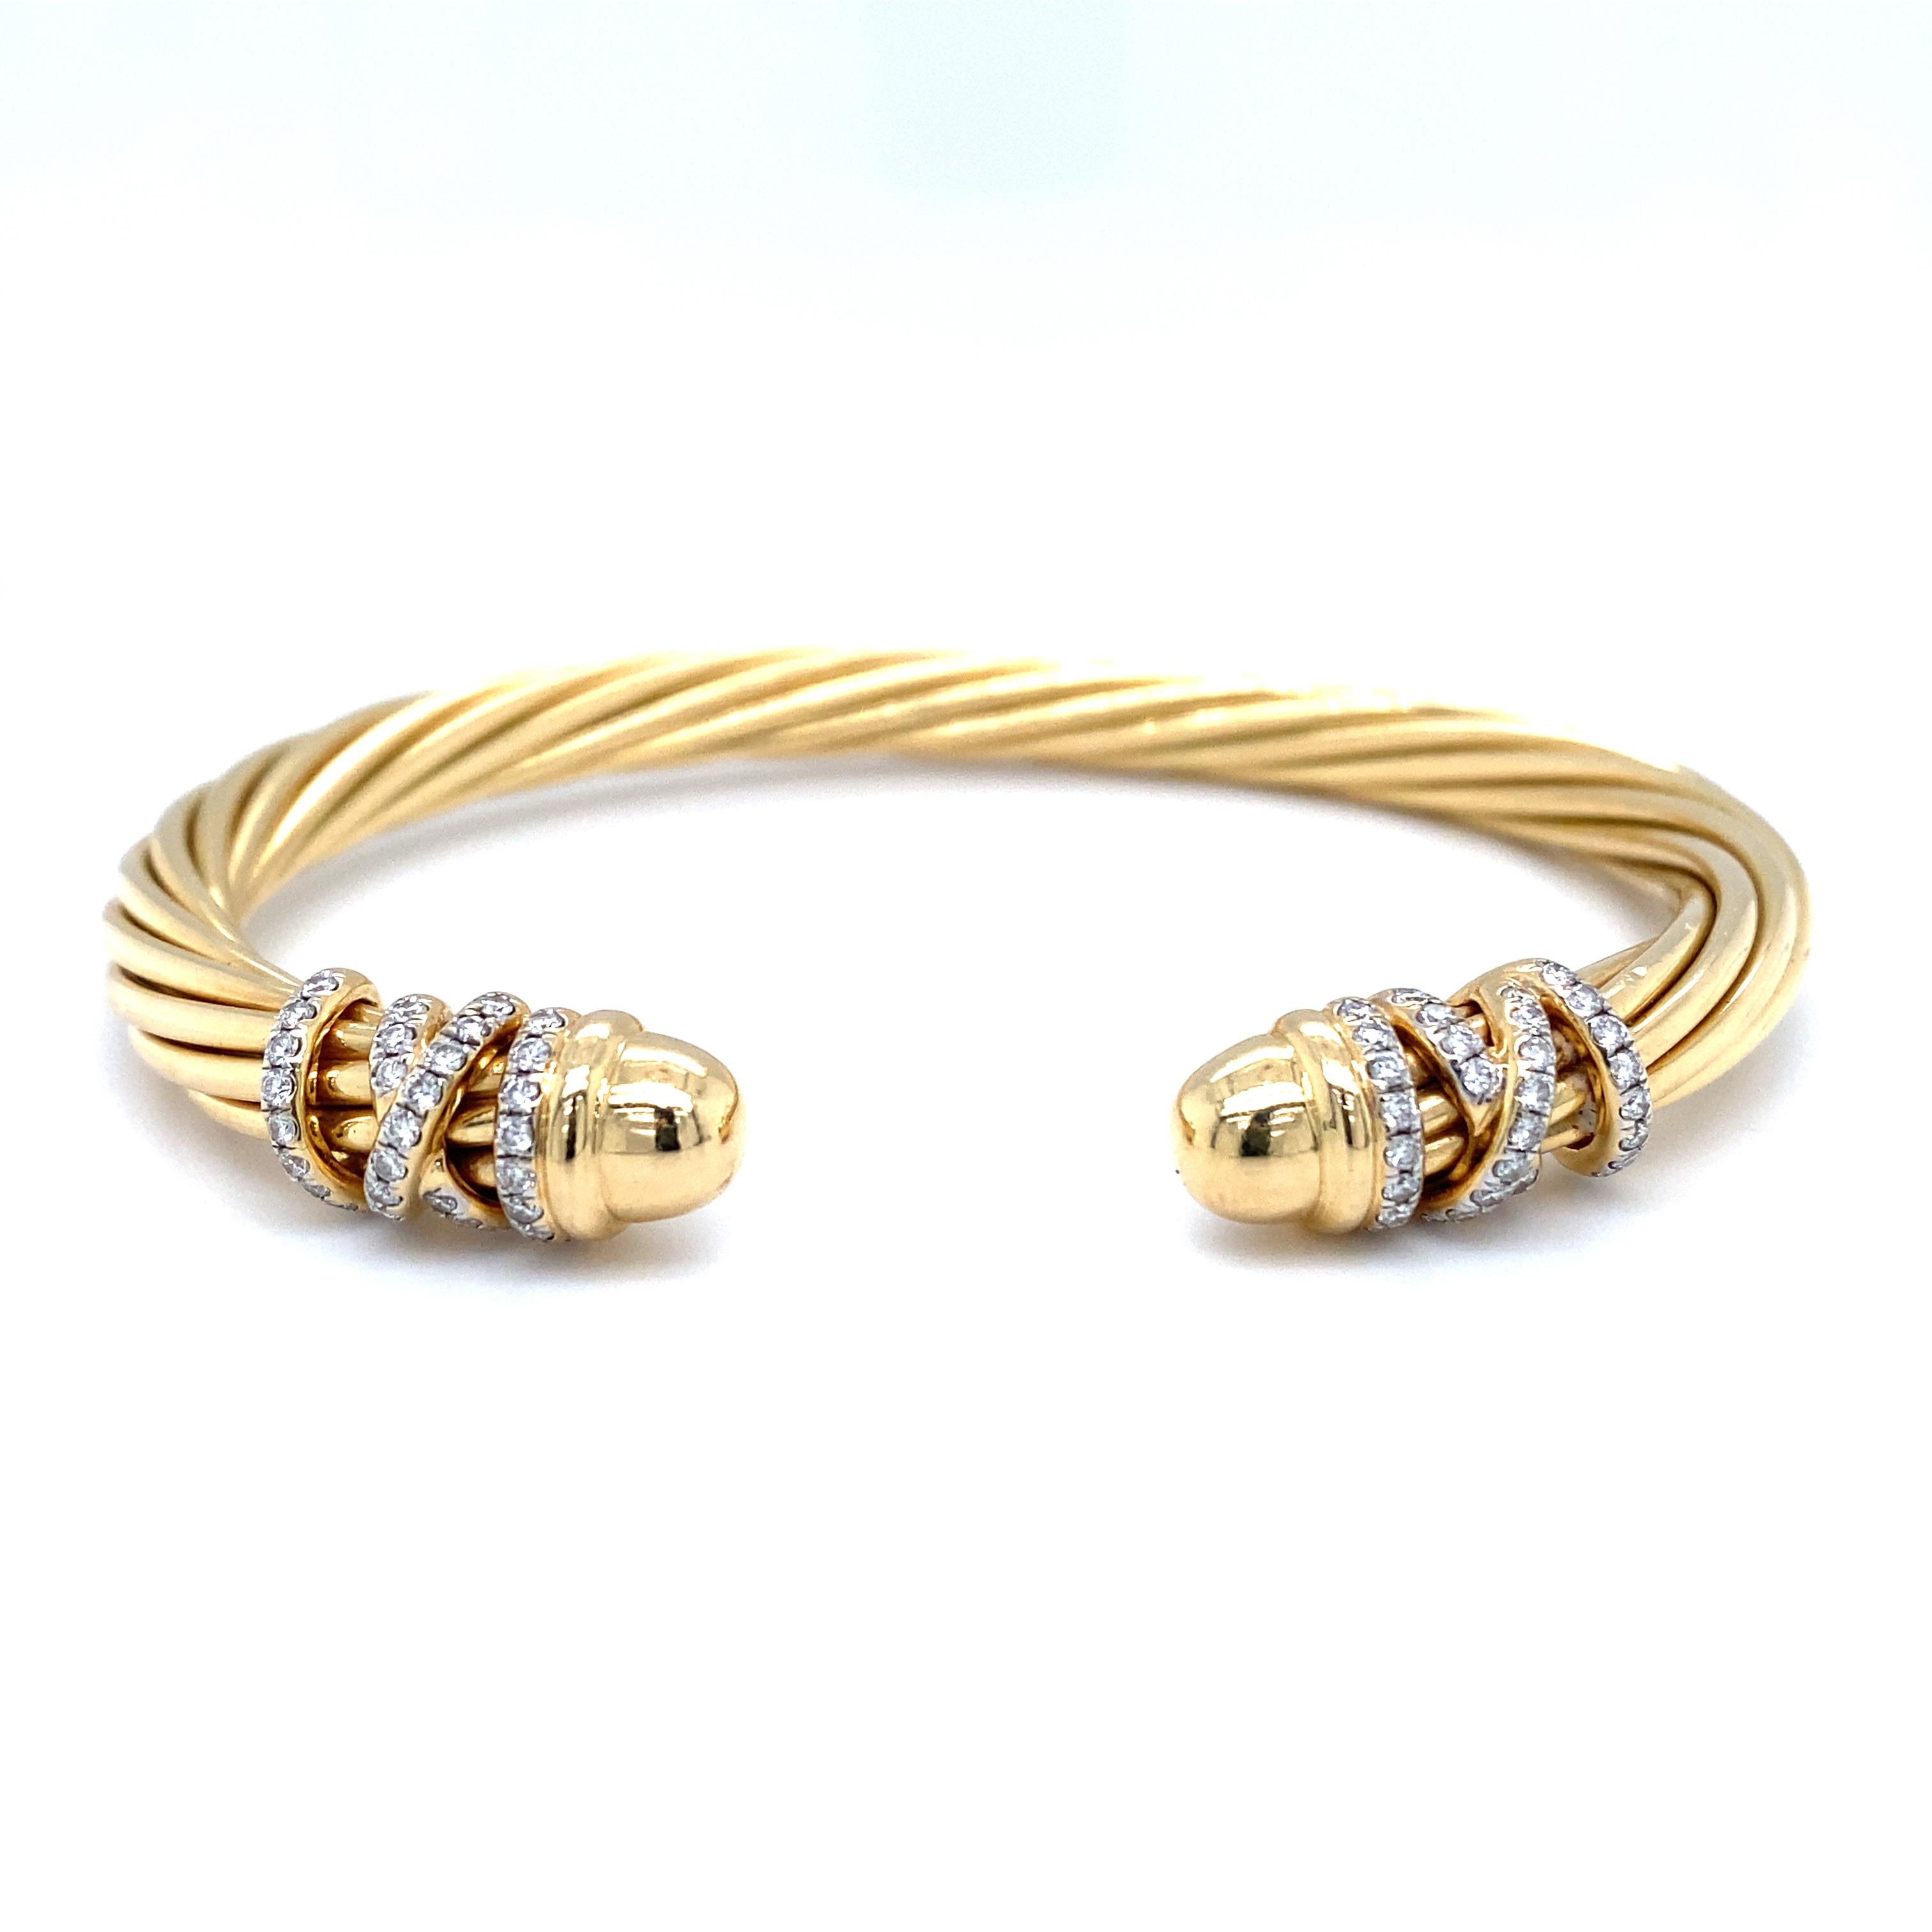 Item Details: This cuff bracelet by David Yurman is the iconic Helena design. It features a unique twisted gold design with wrapped accent studded with diamonds. This bracelet has over half a carat of round diamonds and has domed ends.

This